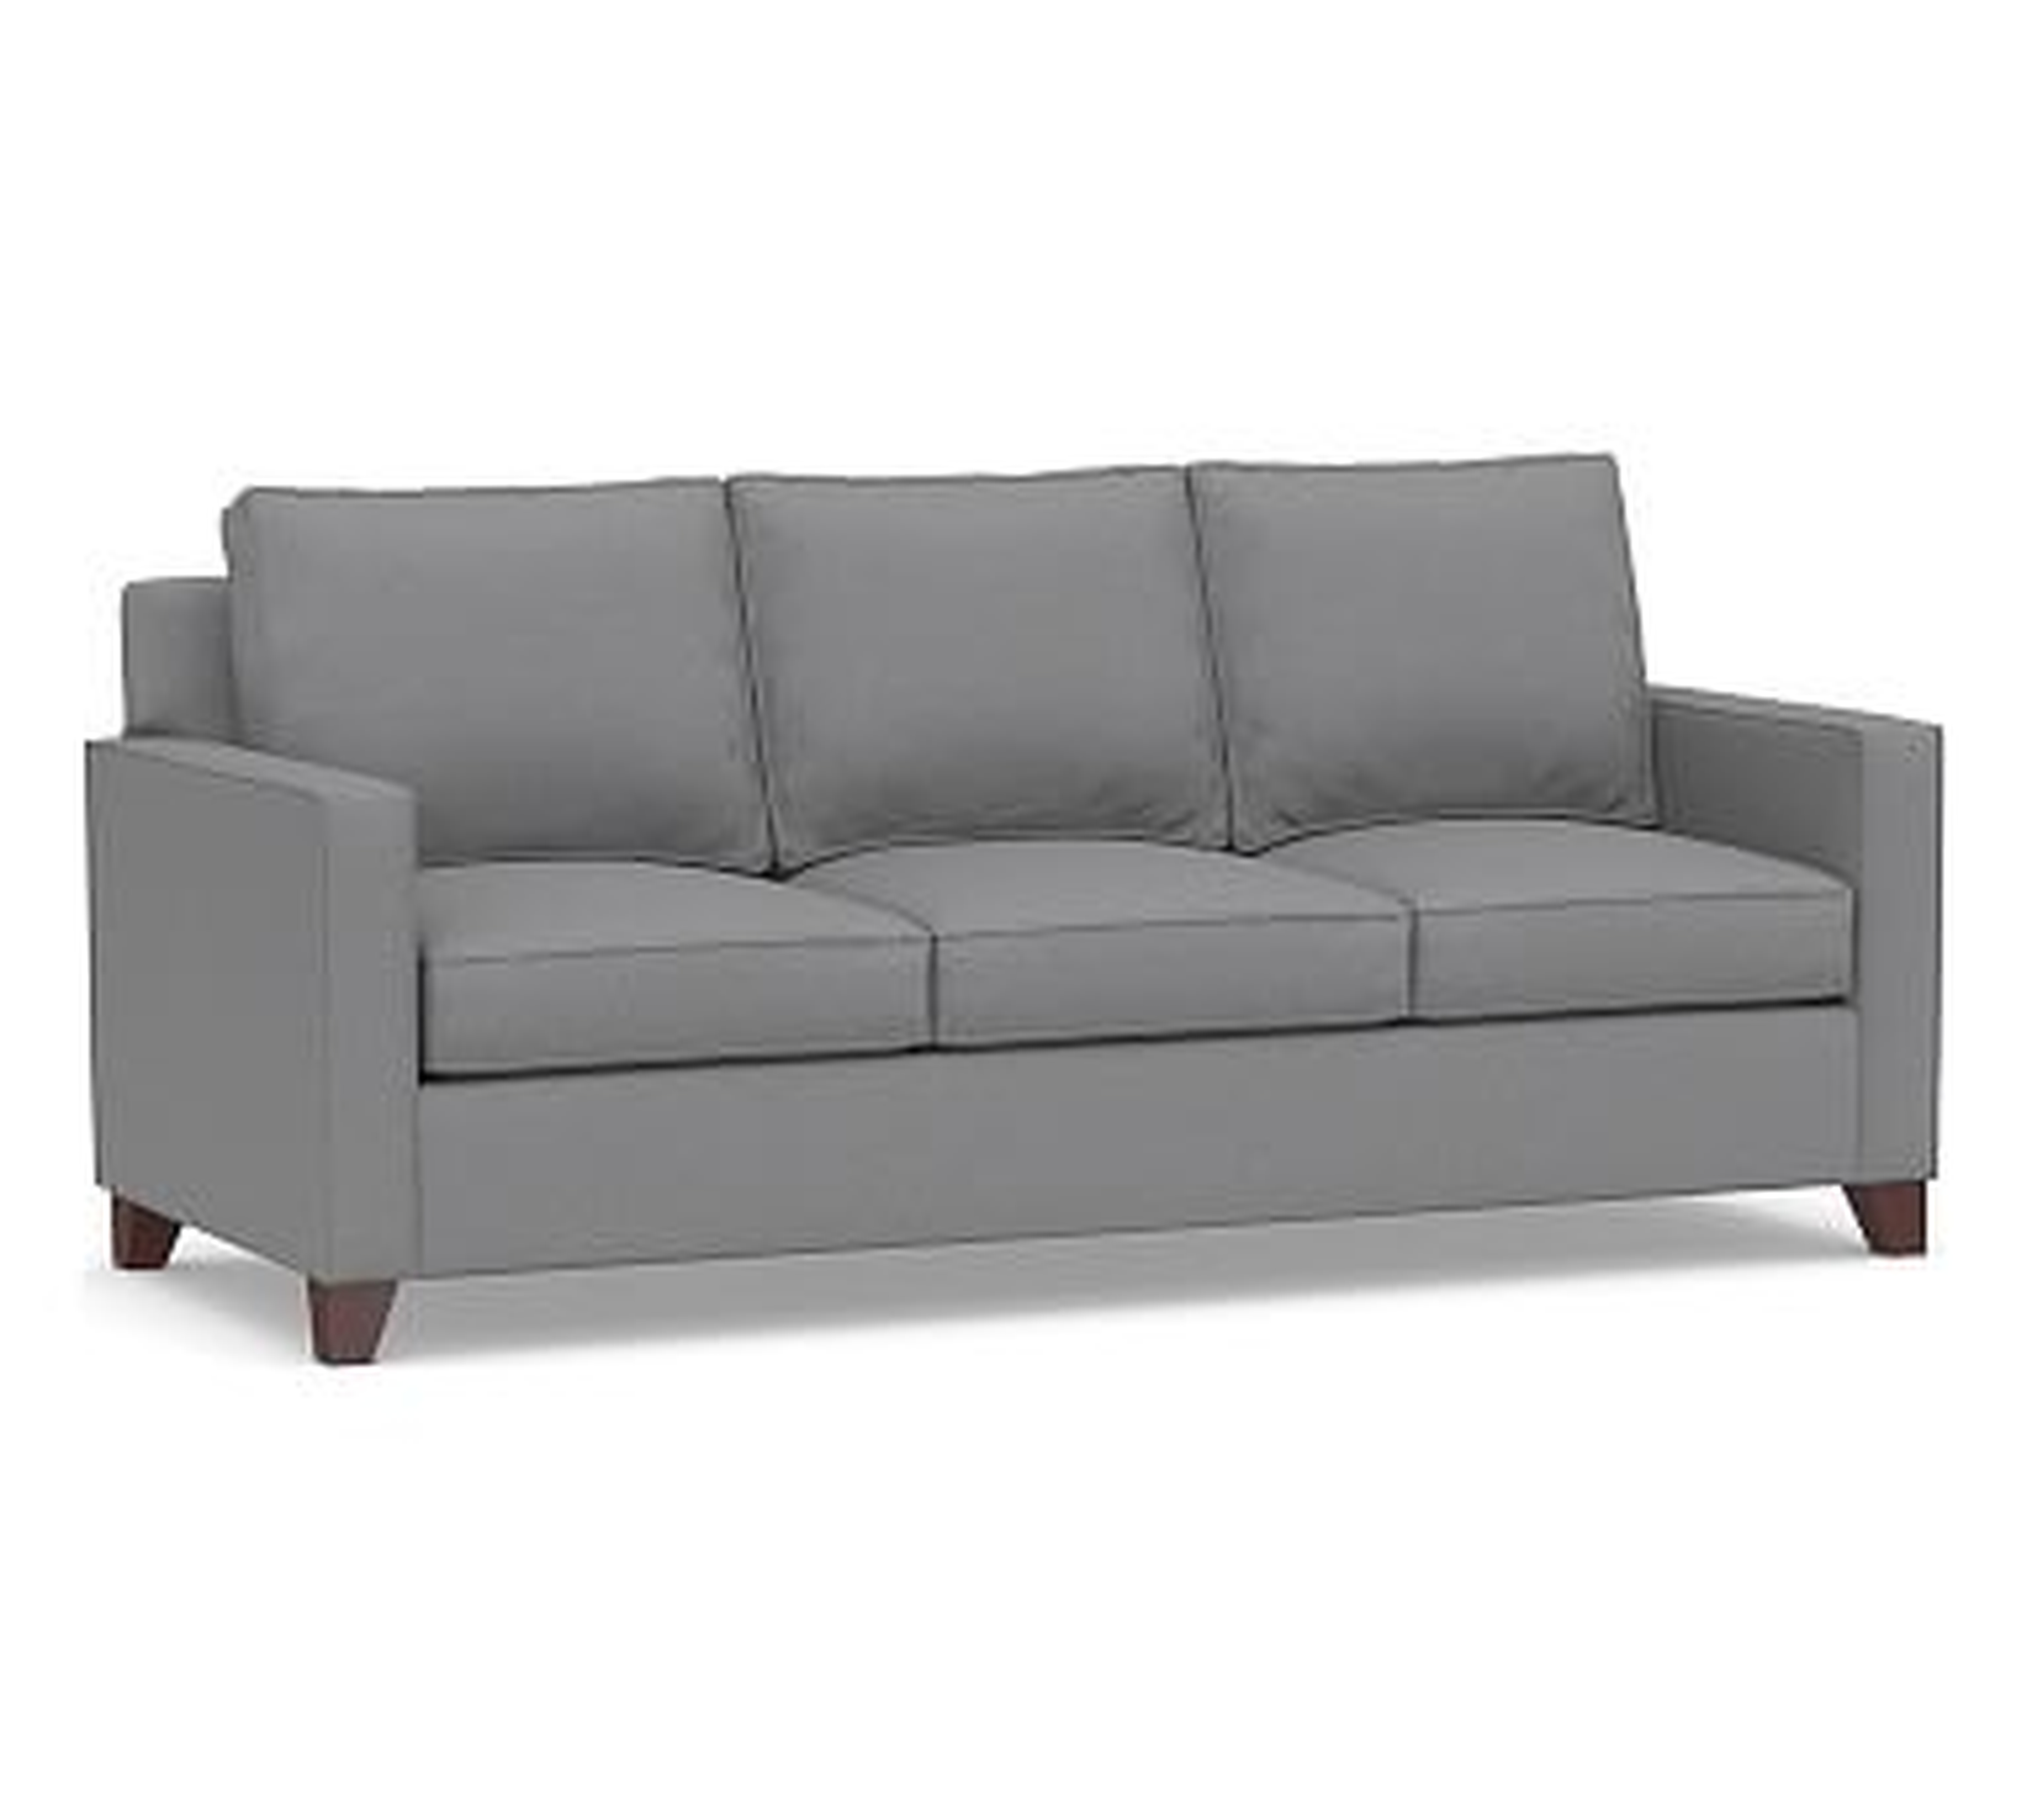 Cameron Square Arm Upholstered Sofa 86" 3-Seater, Polyester Wrapped Cushions, Textured Twill Light Gray - Pottery Barn